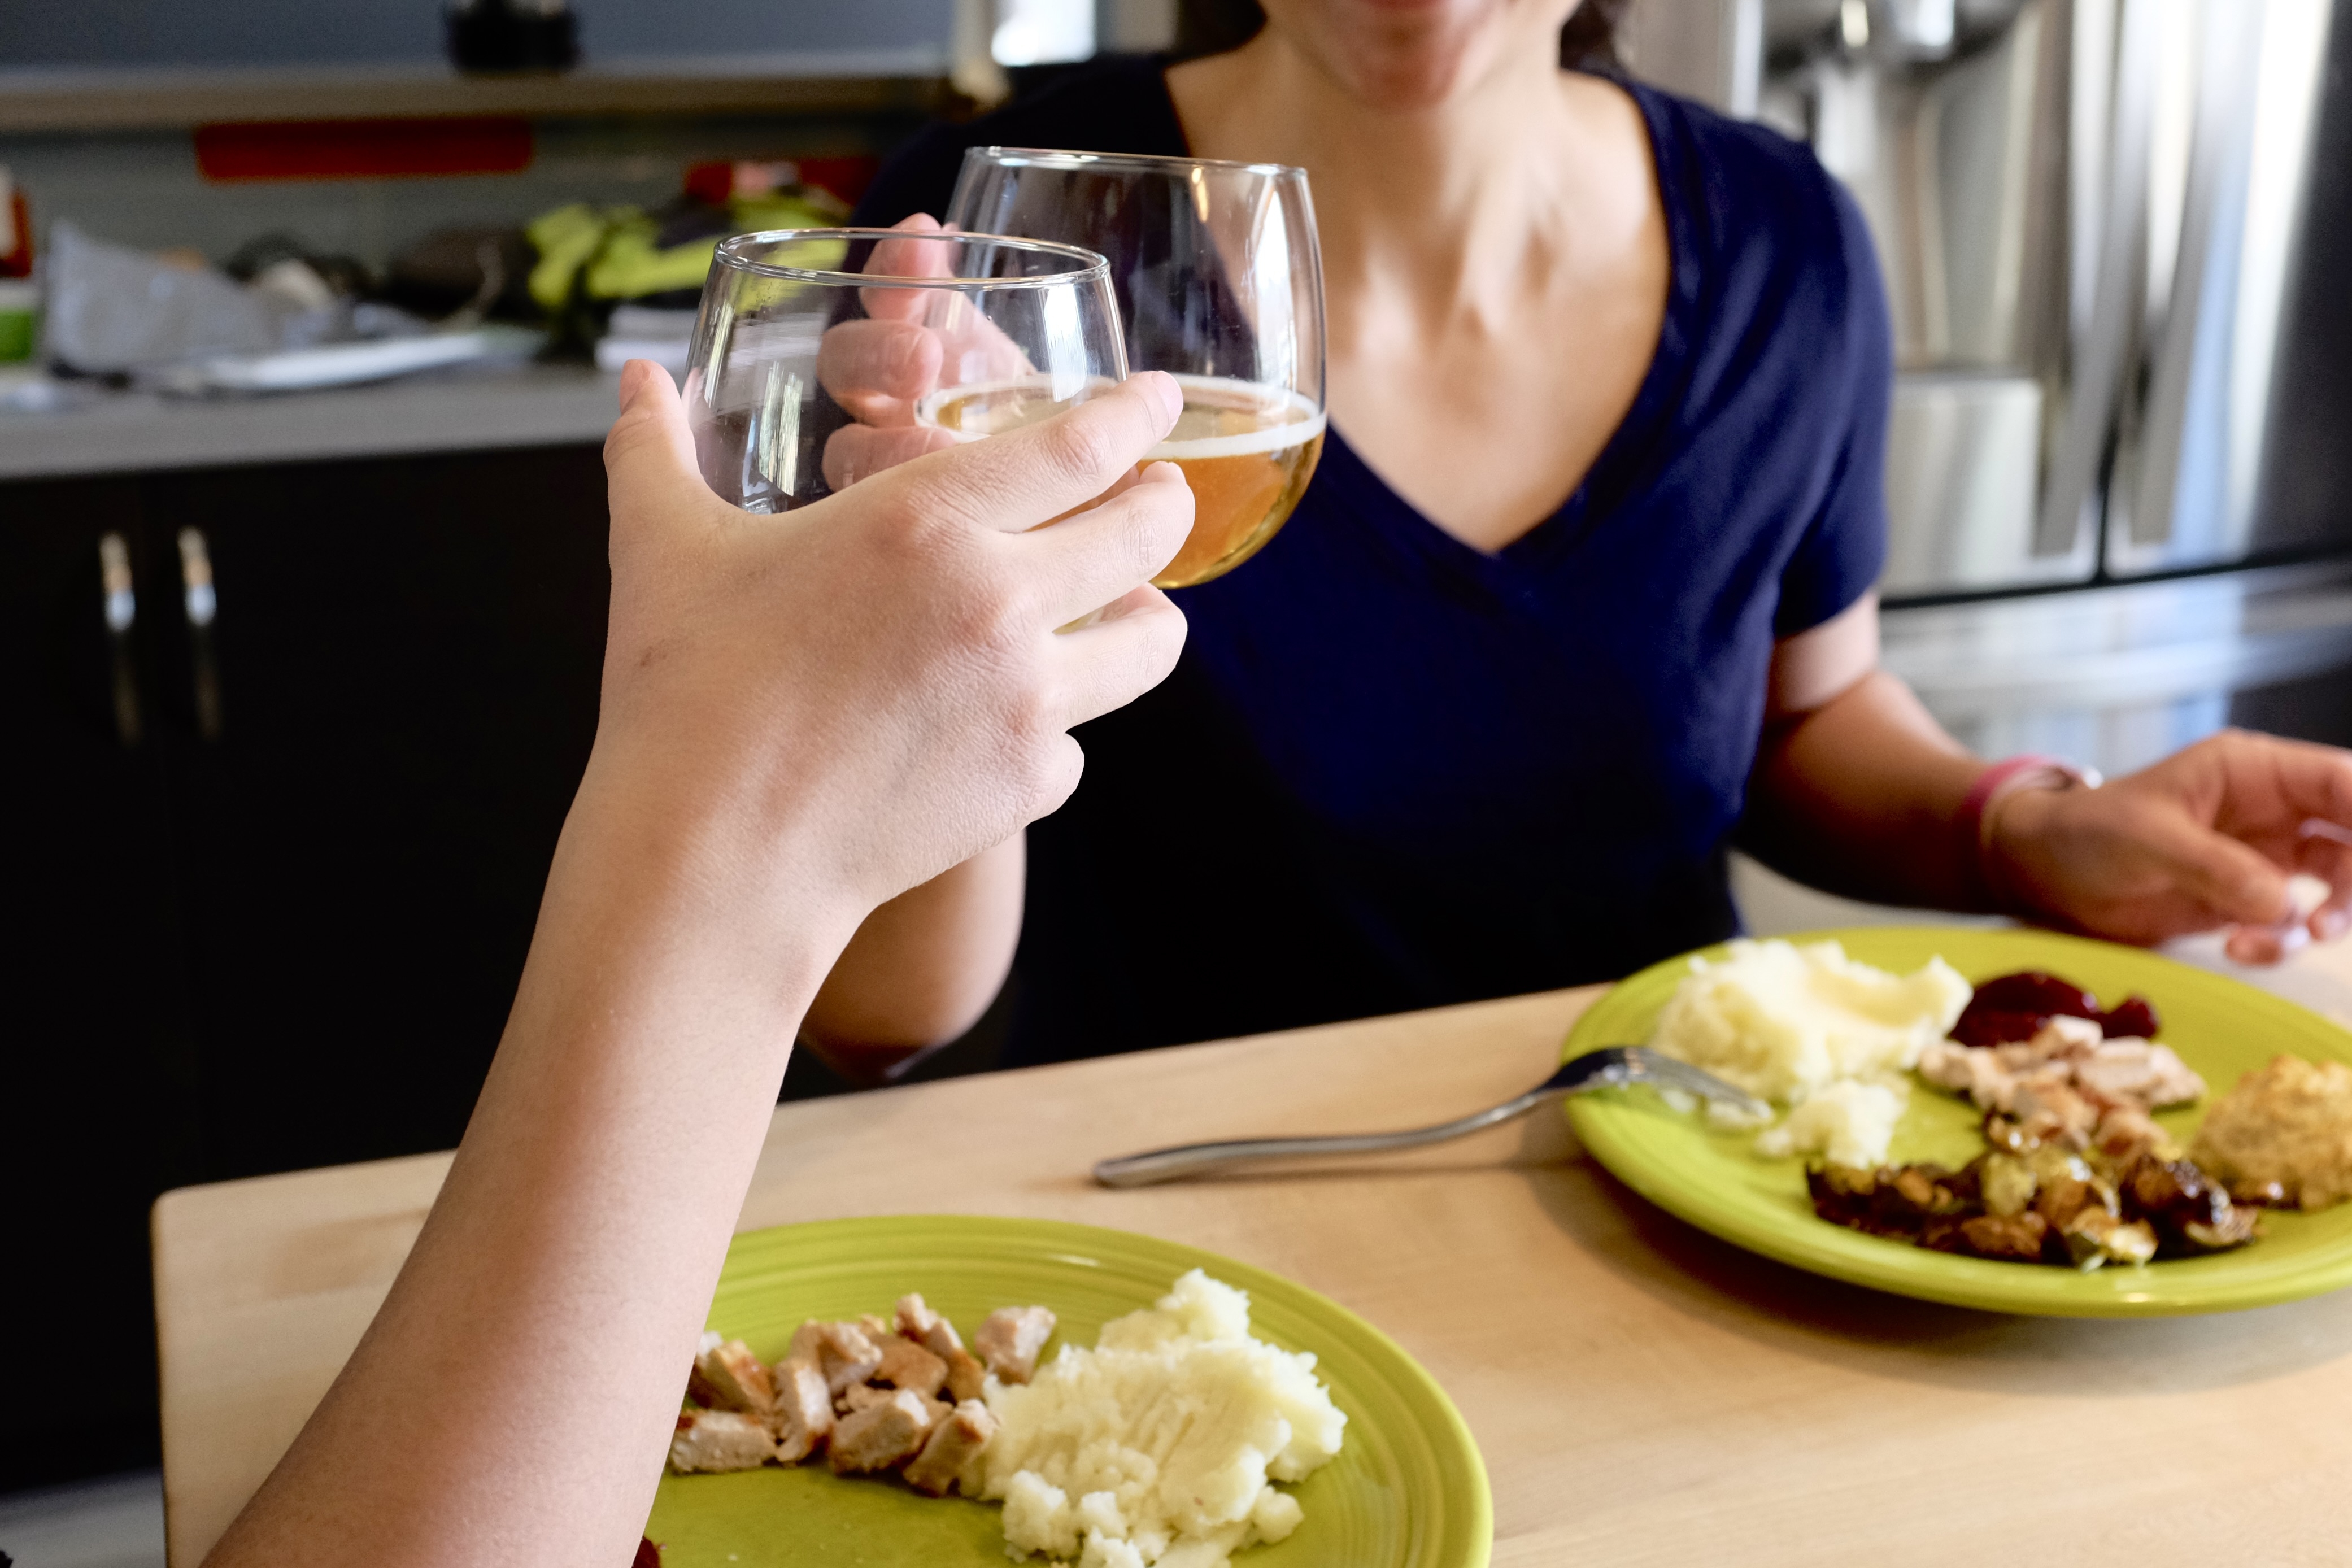 This photo is cropped so that two arms are seen touching a pair of glasses containing sparkling apple cider, over two green colored plates, holding slices of pork, mashed potatoes, and brussels sprouts.